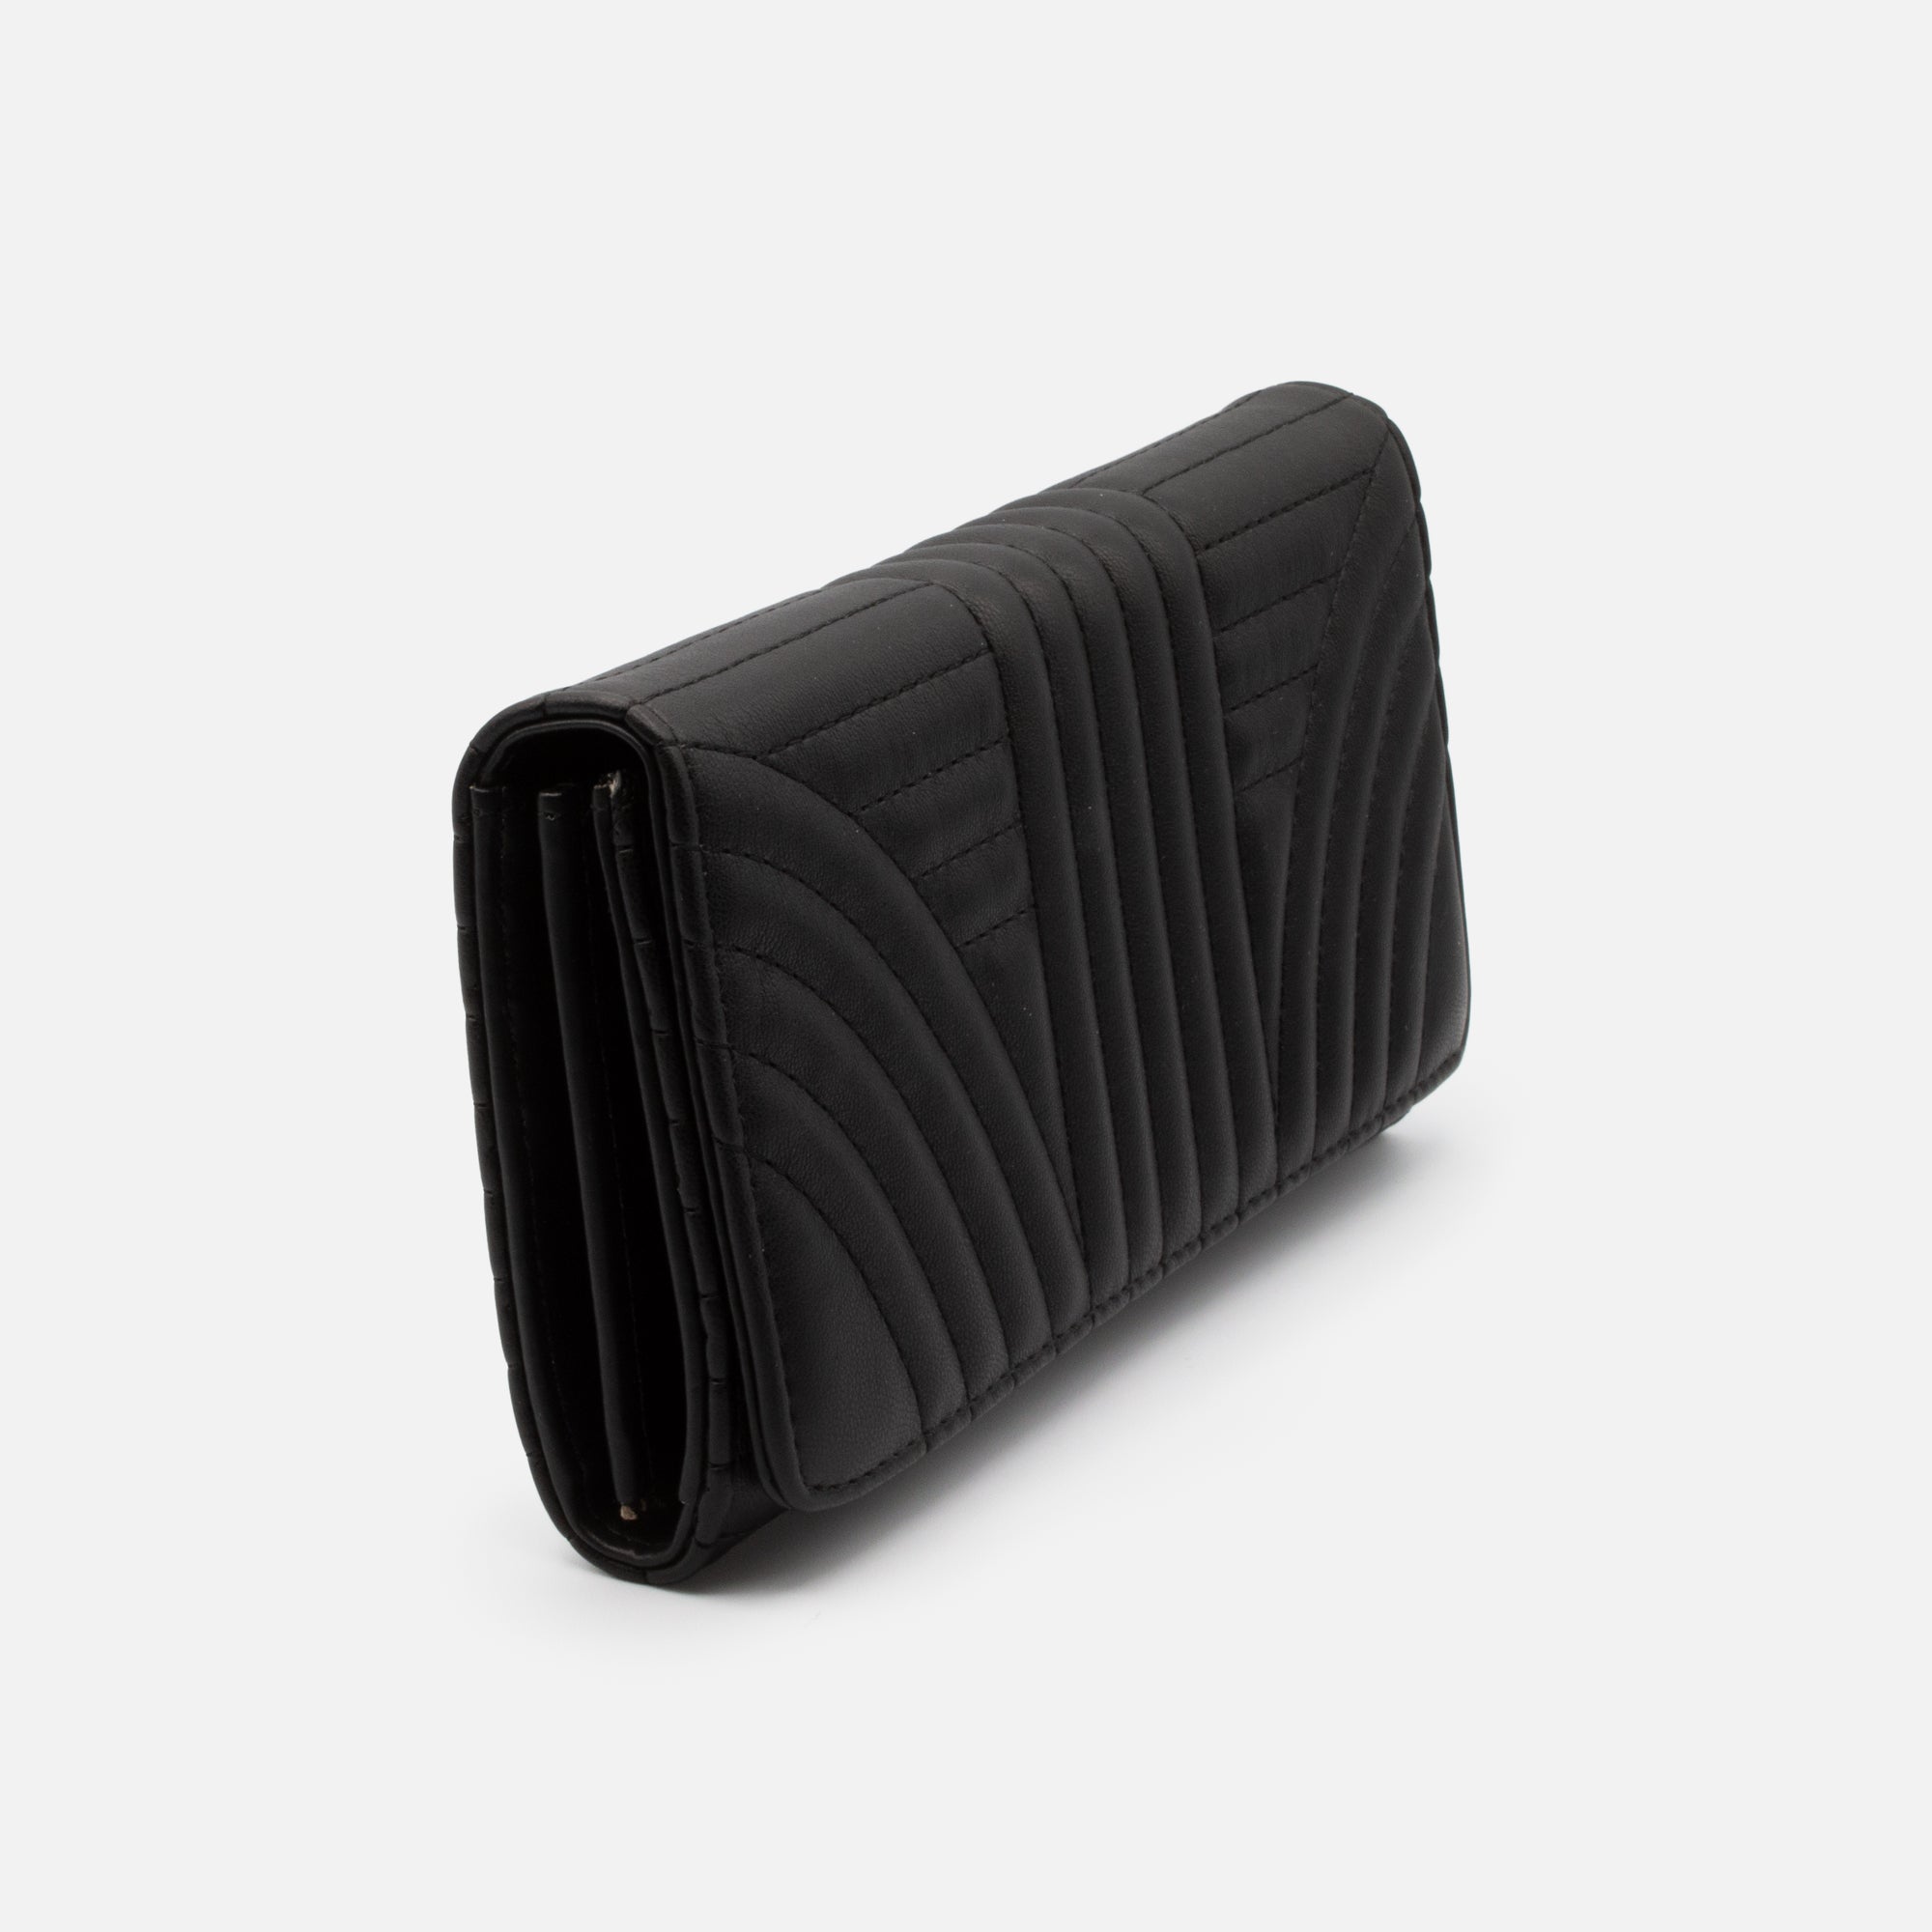 Black quilted wallet with linear patterns